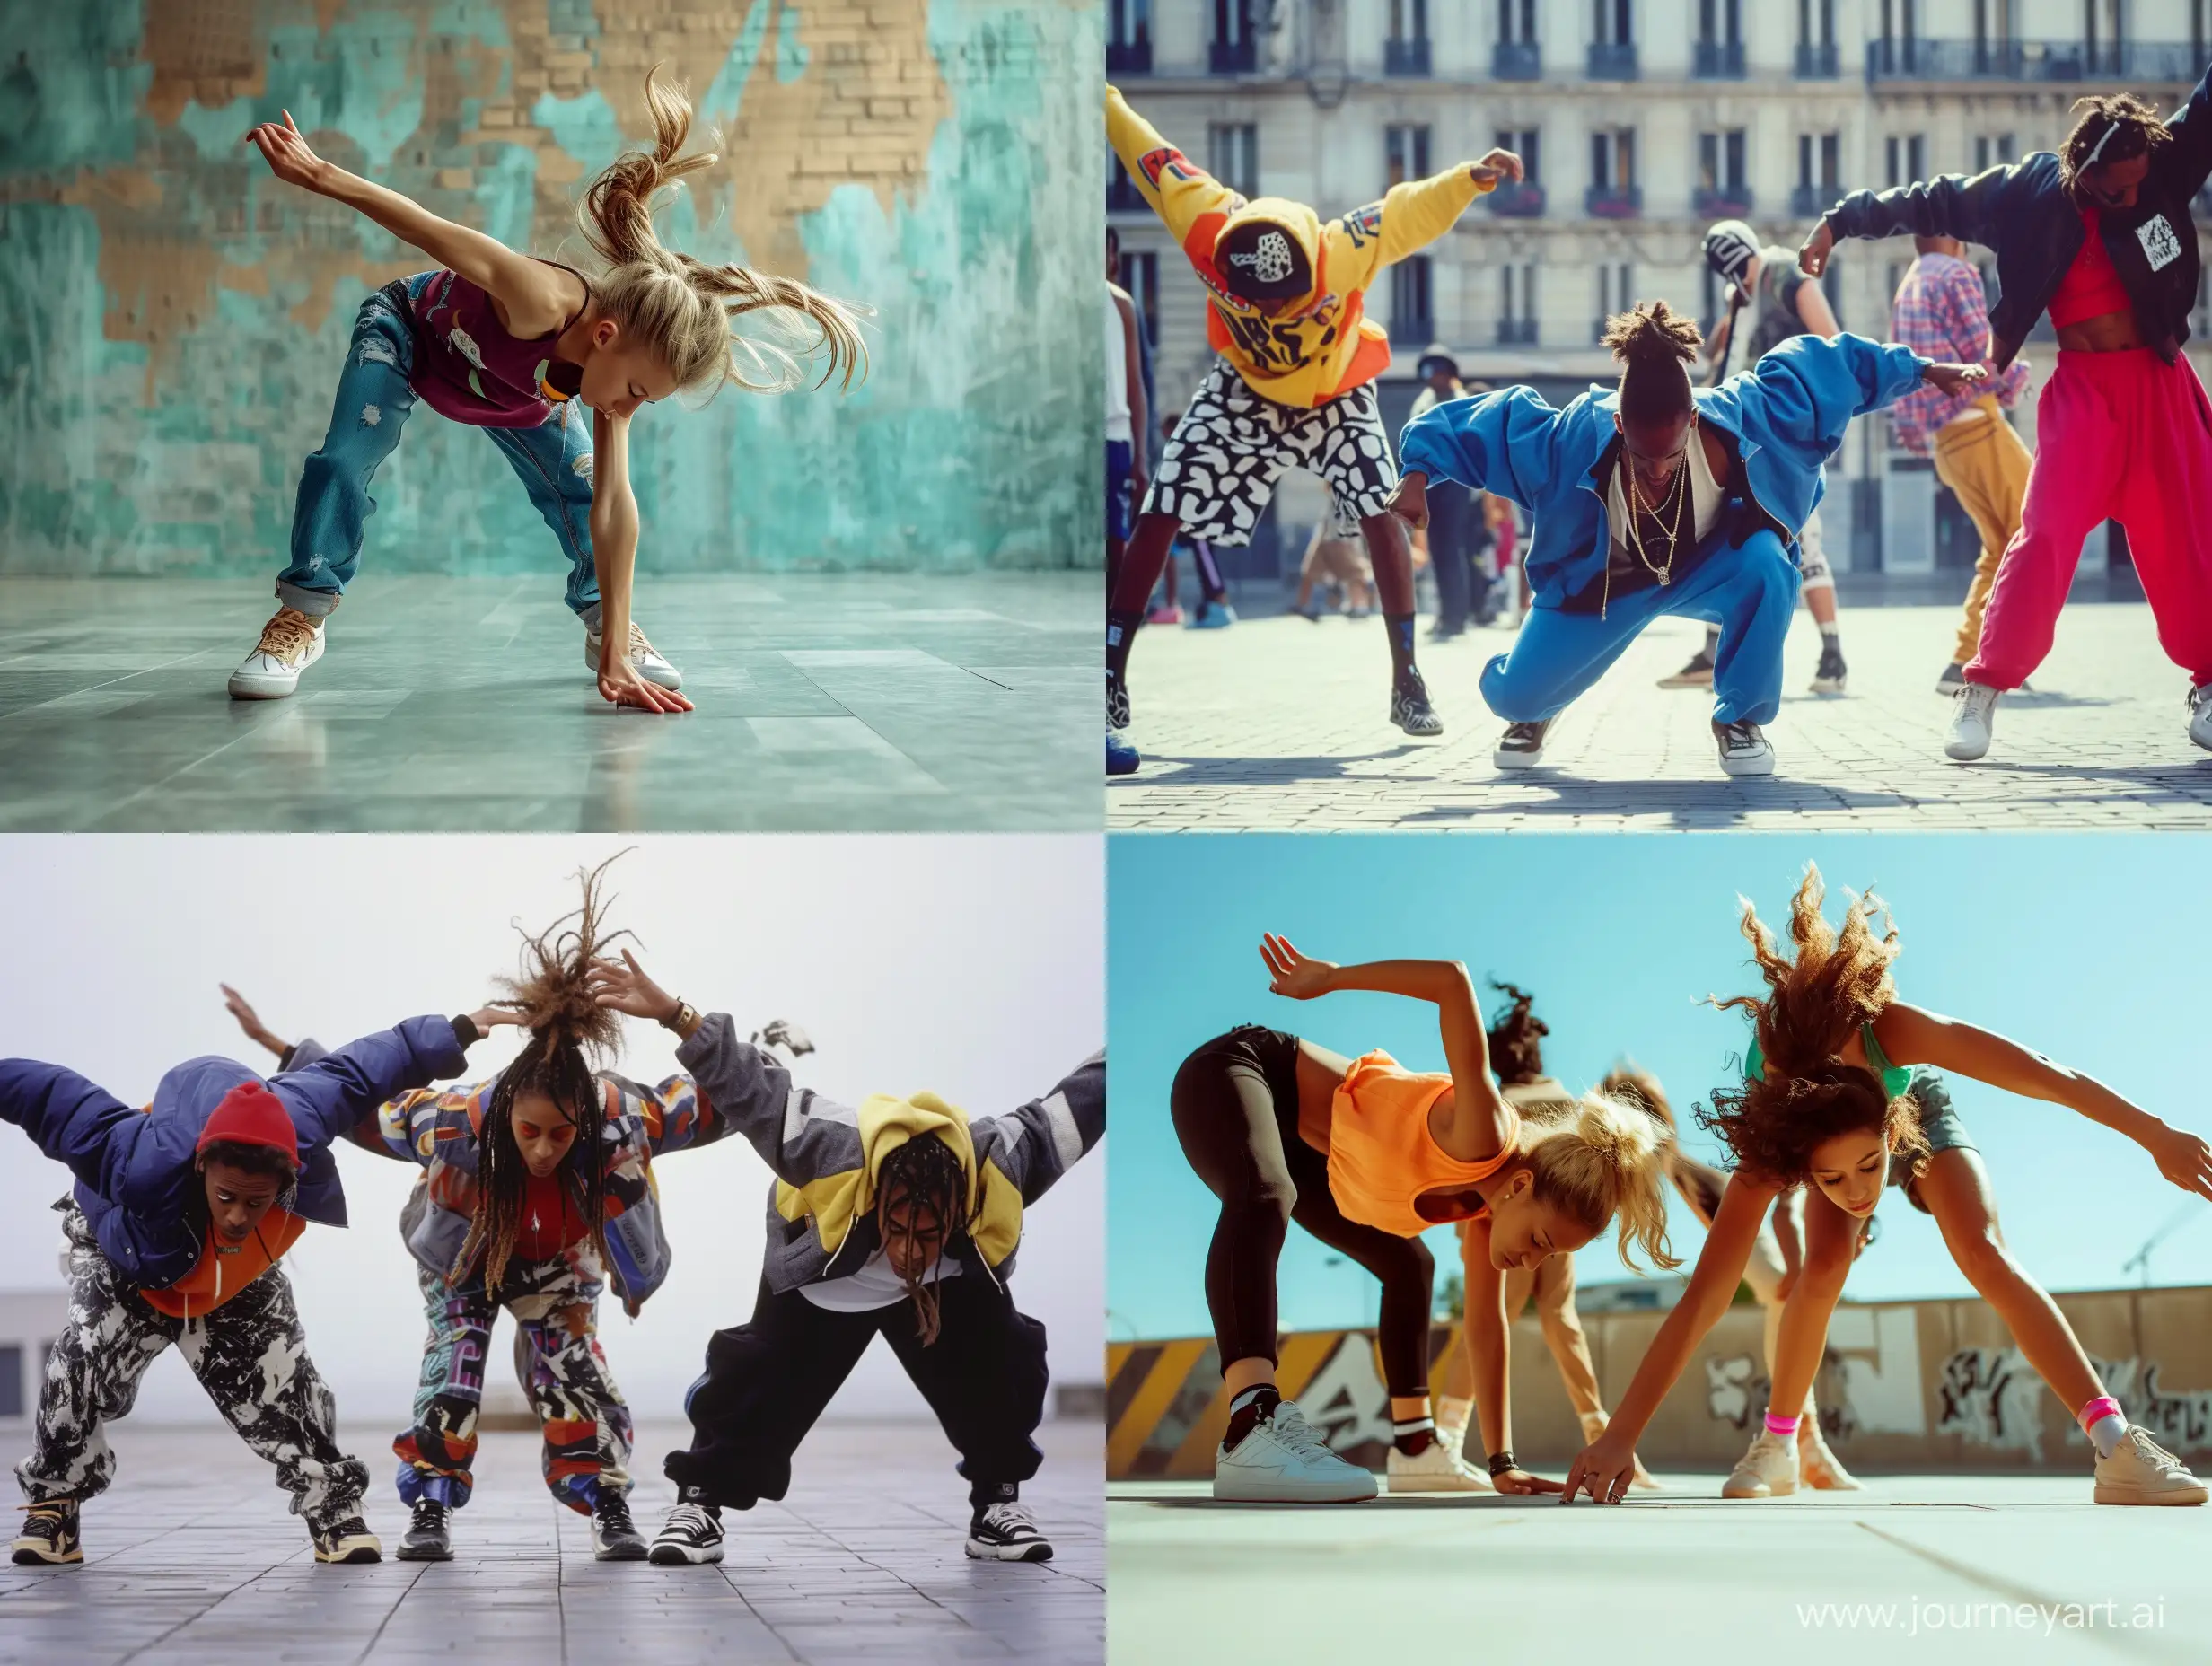 Create pictures of the 90s: a sporty style of street dance, a form of street dance that may involve fast footwork, spinning on your head or back, and balancing on your head or hands.